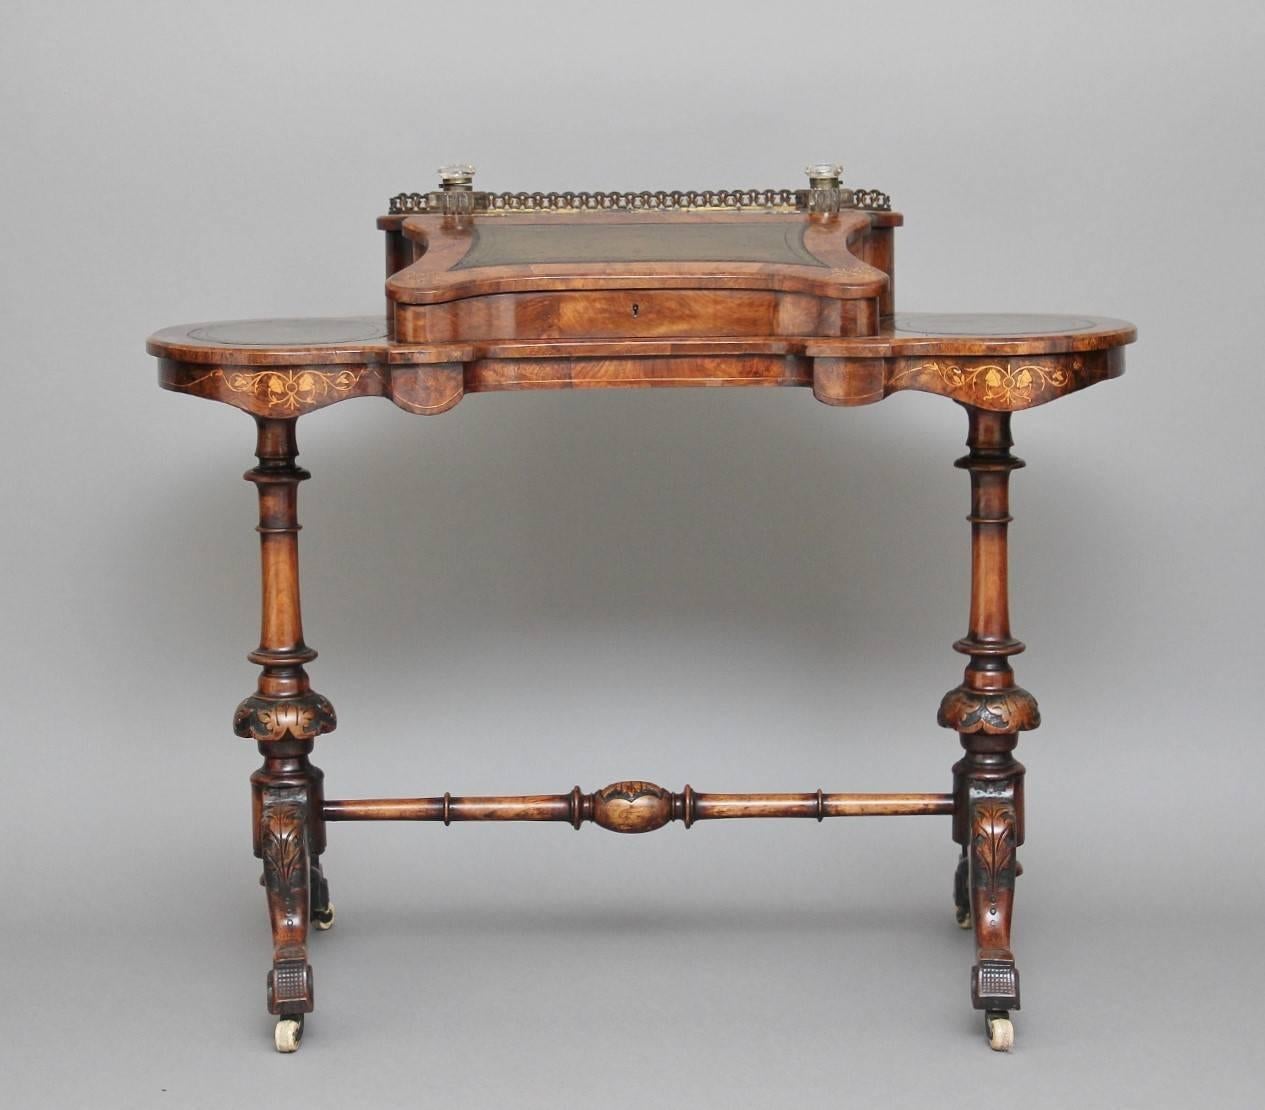 A lovely quality 19th century inlaid walnut ladies writing table, the kidney shaped top with rear brass gallery and a green leather inset slope opening to reveal a fitted interior, with a rear pen tray, flanked by glass inkwells raised on carved